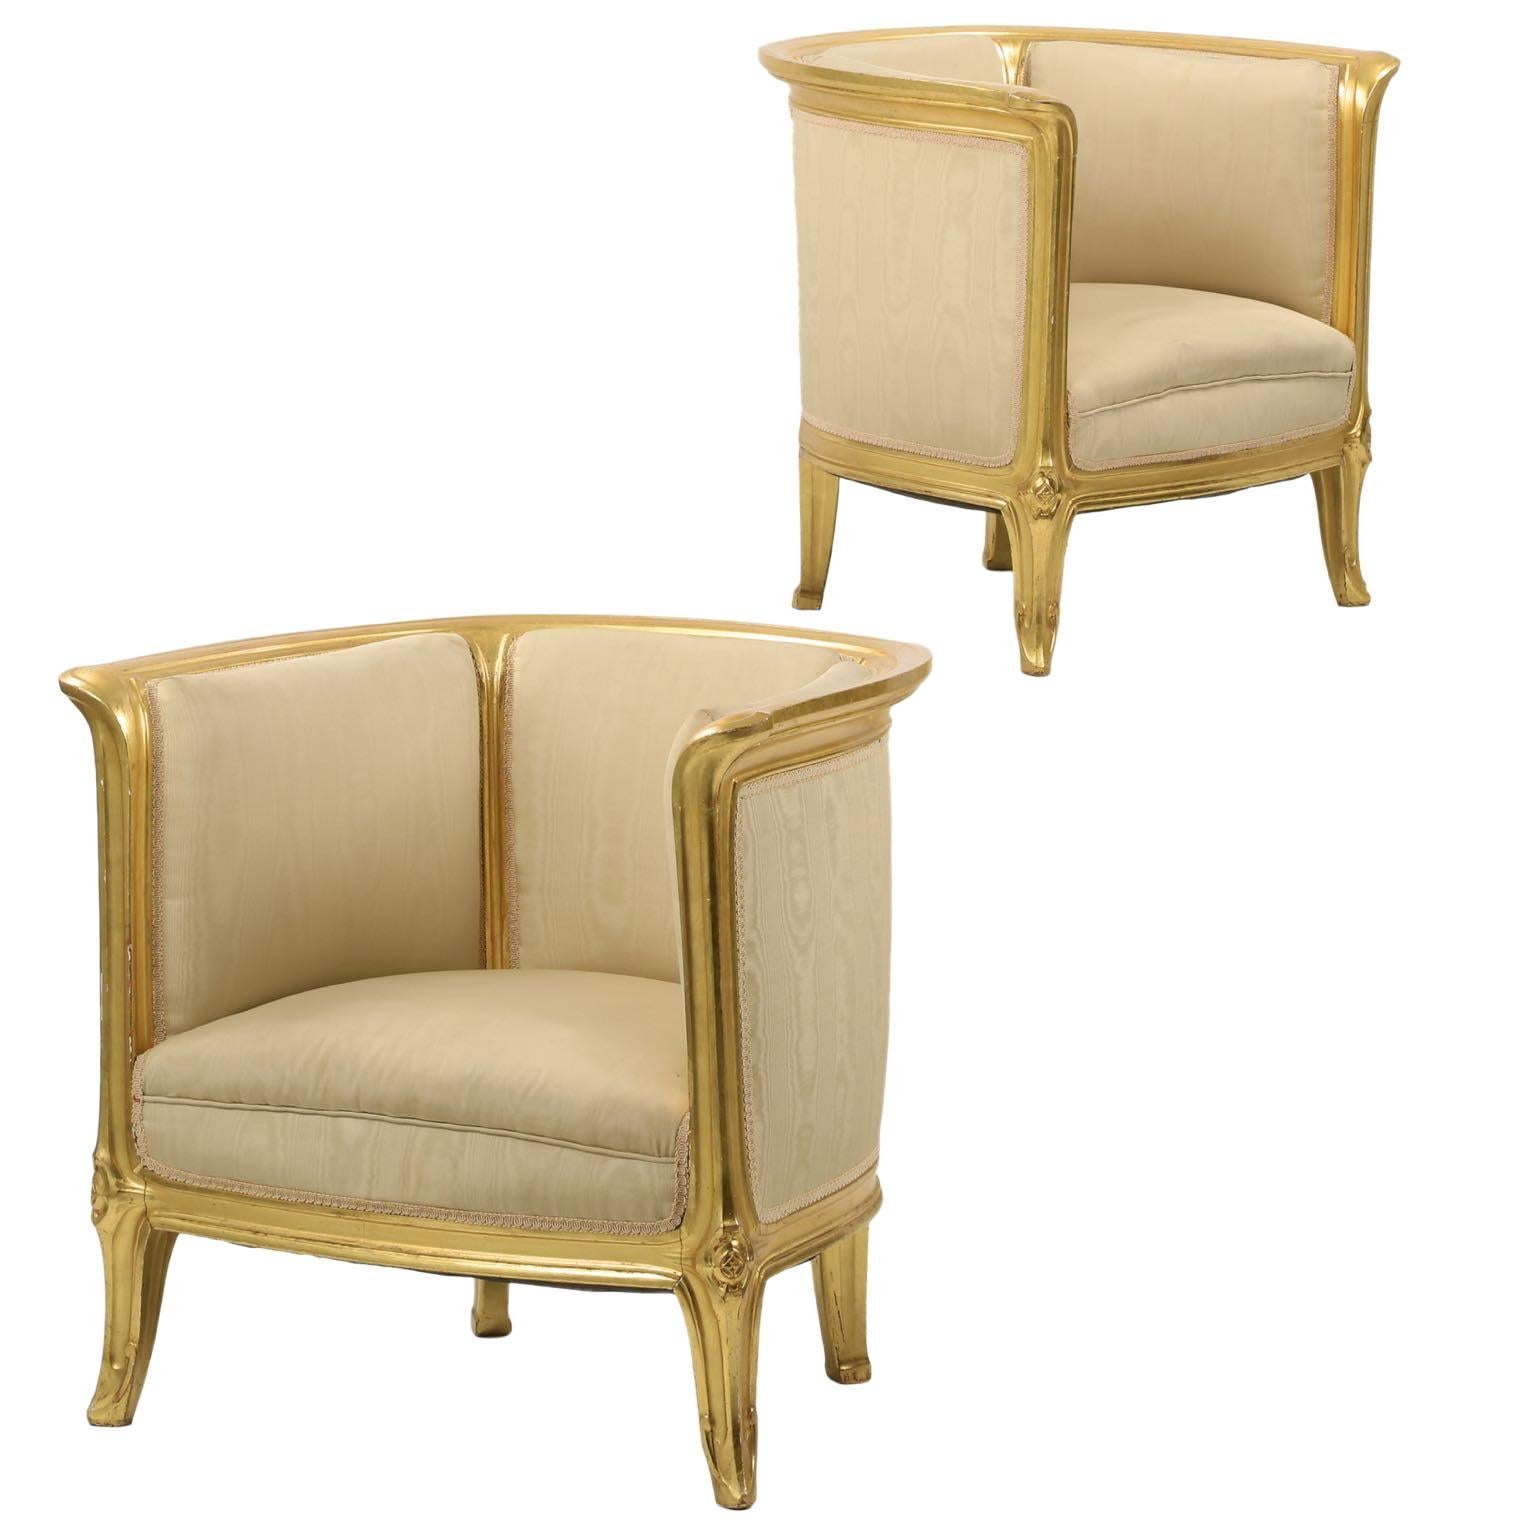 Pair of Art Nouveau Period Carved Giltwood Club Lounge Arm Chairs